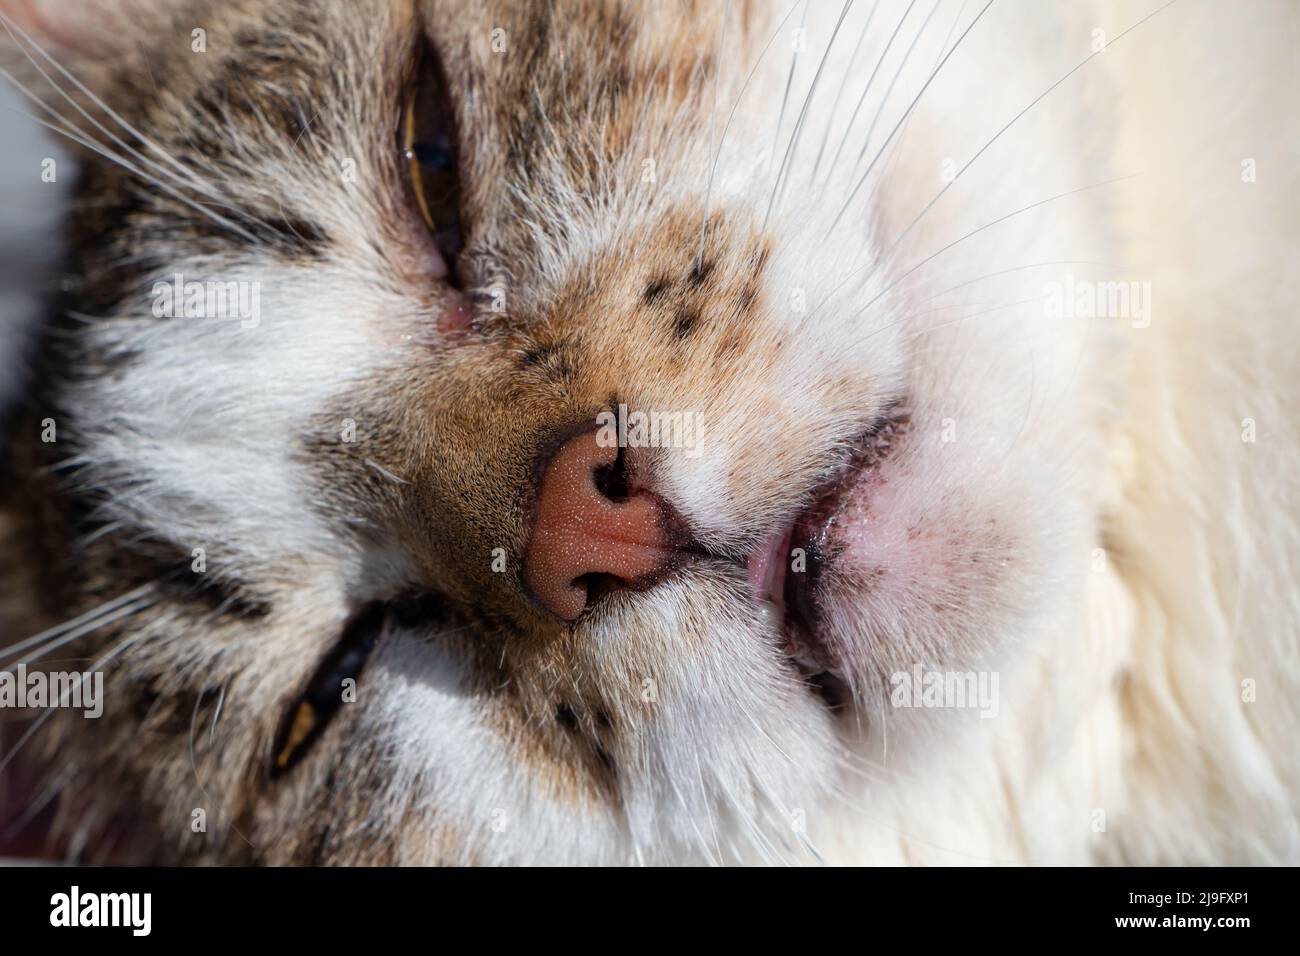 Close up on the muzzle of a lying down tabby cat Stock Photo